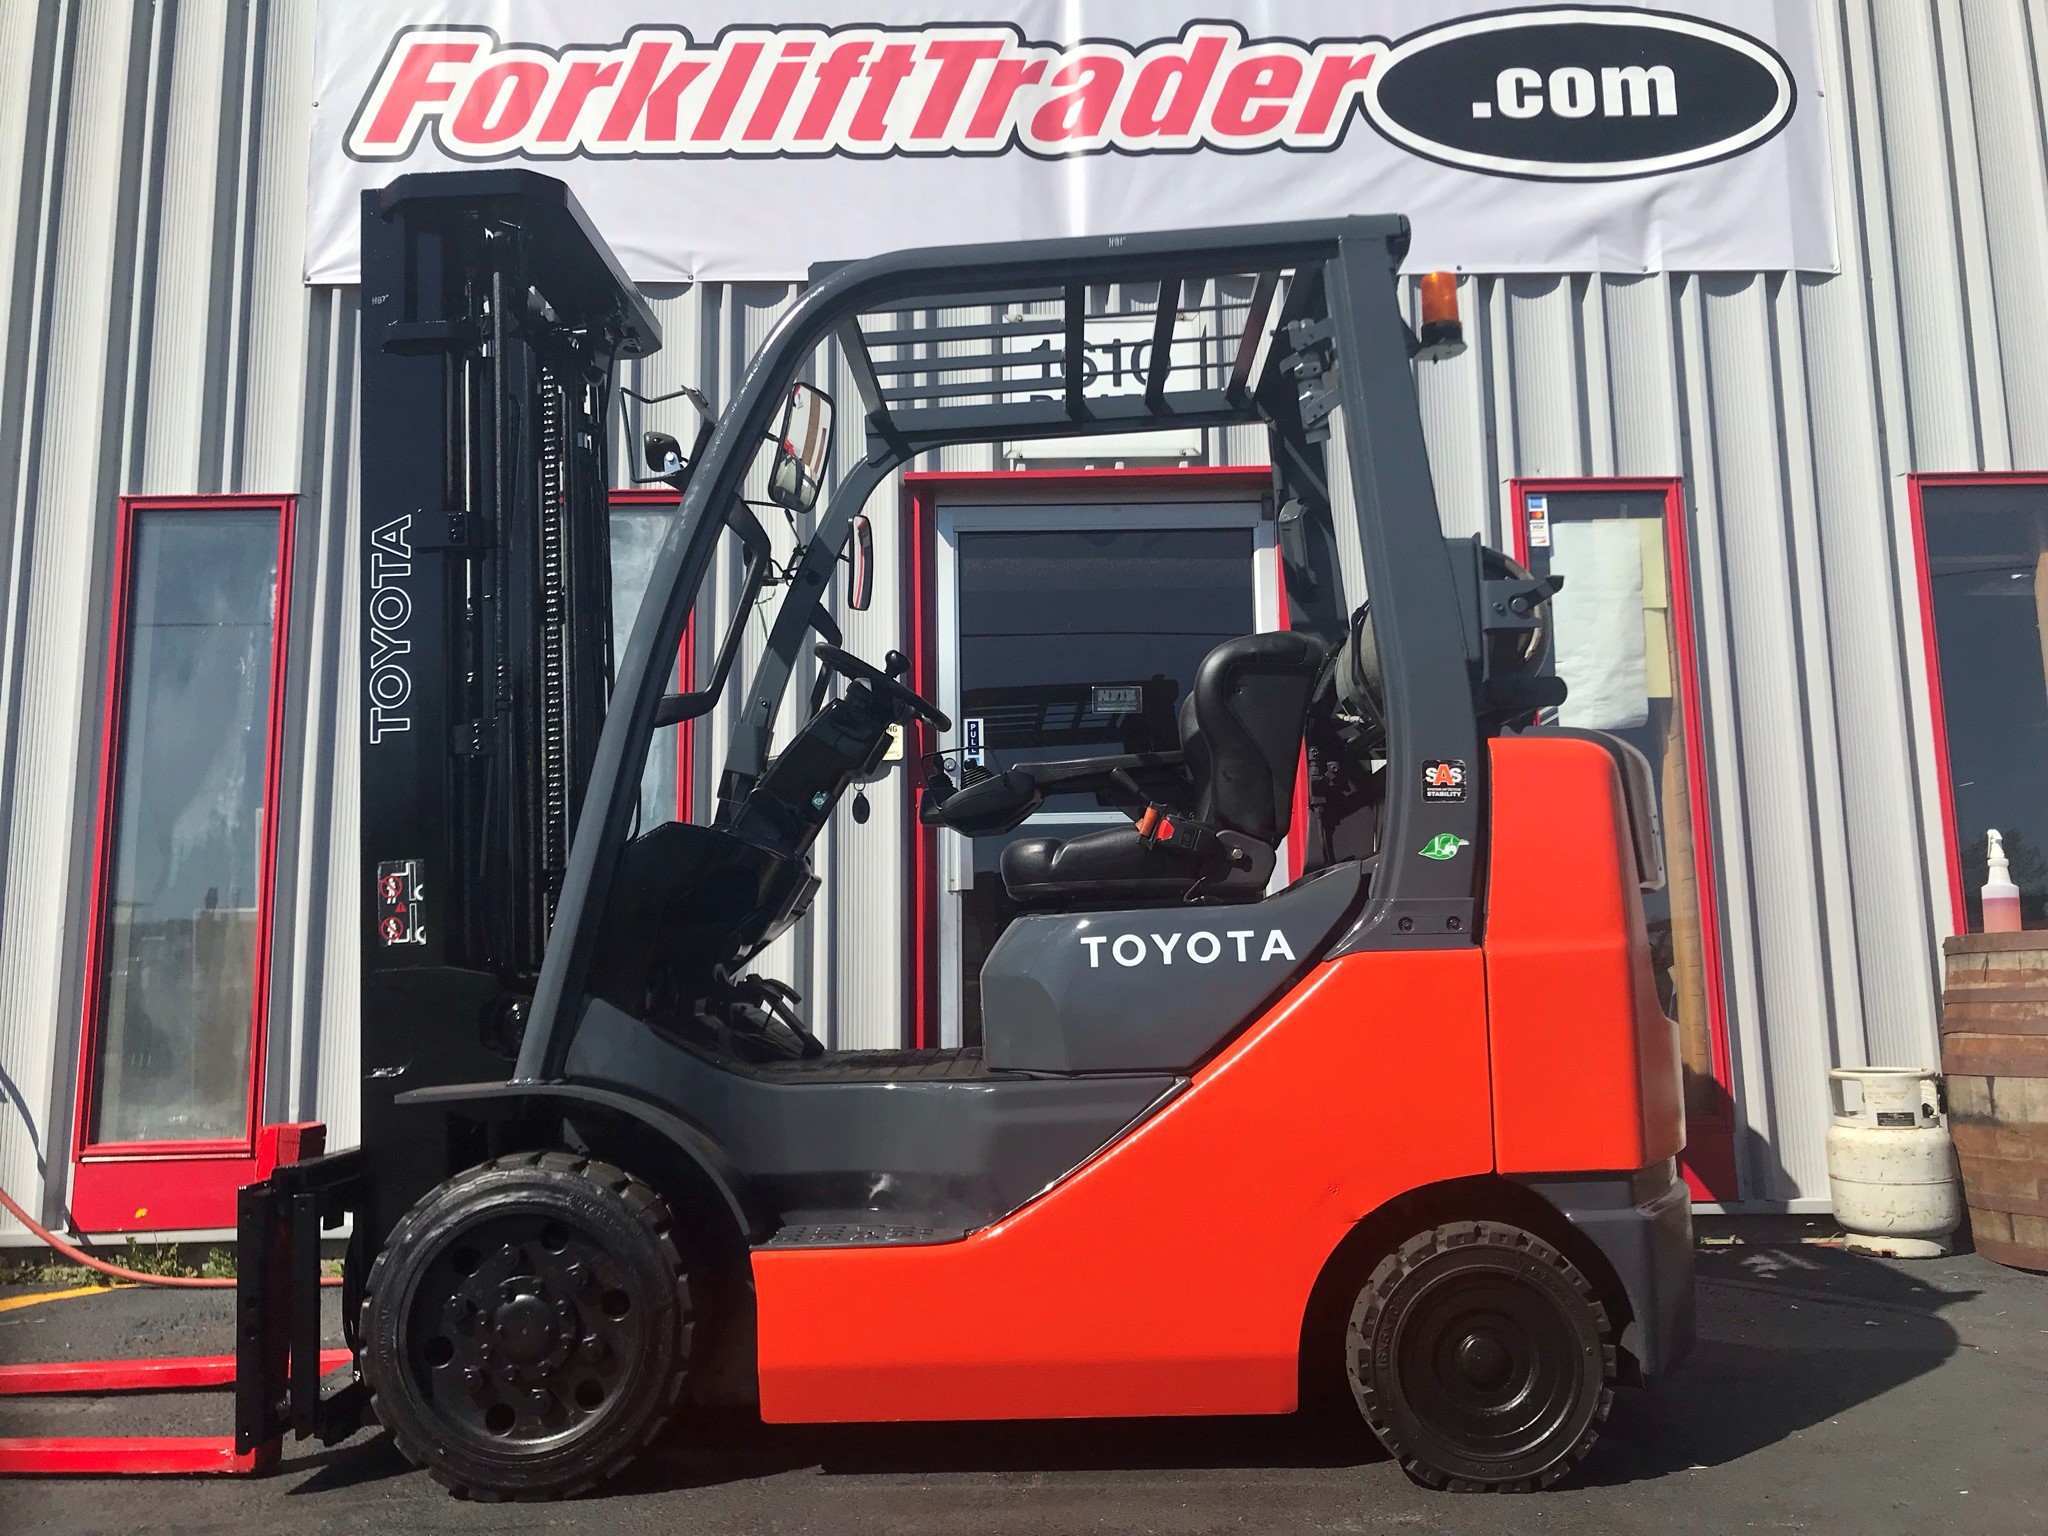 Cushion tires 2015 toyota forklift for sale